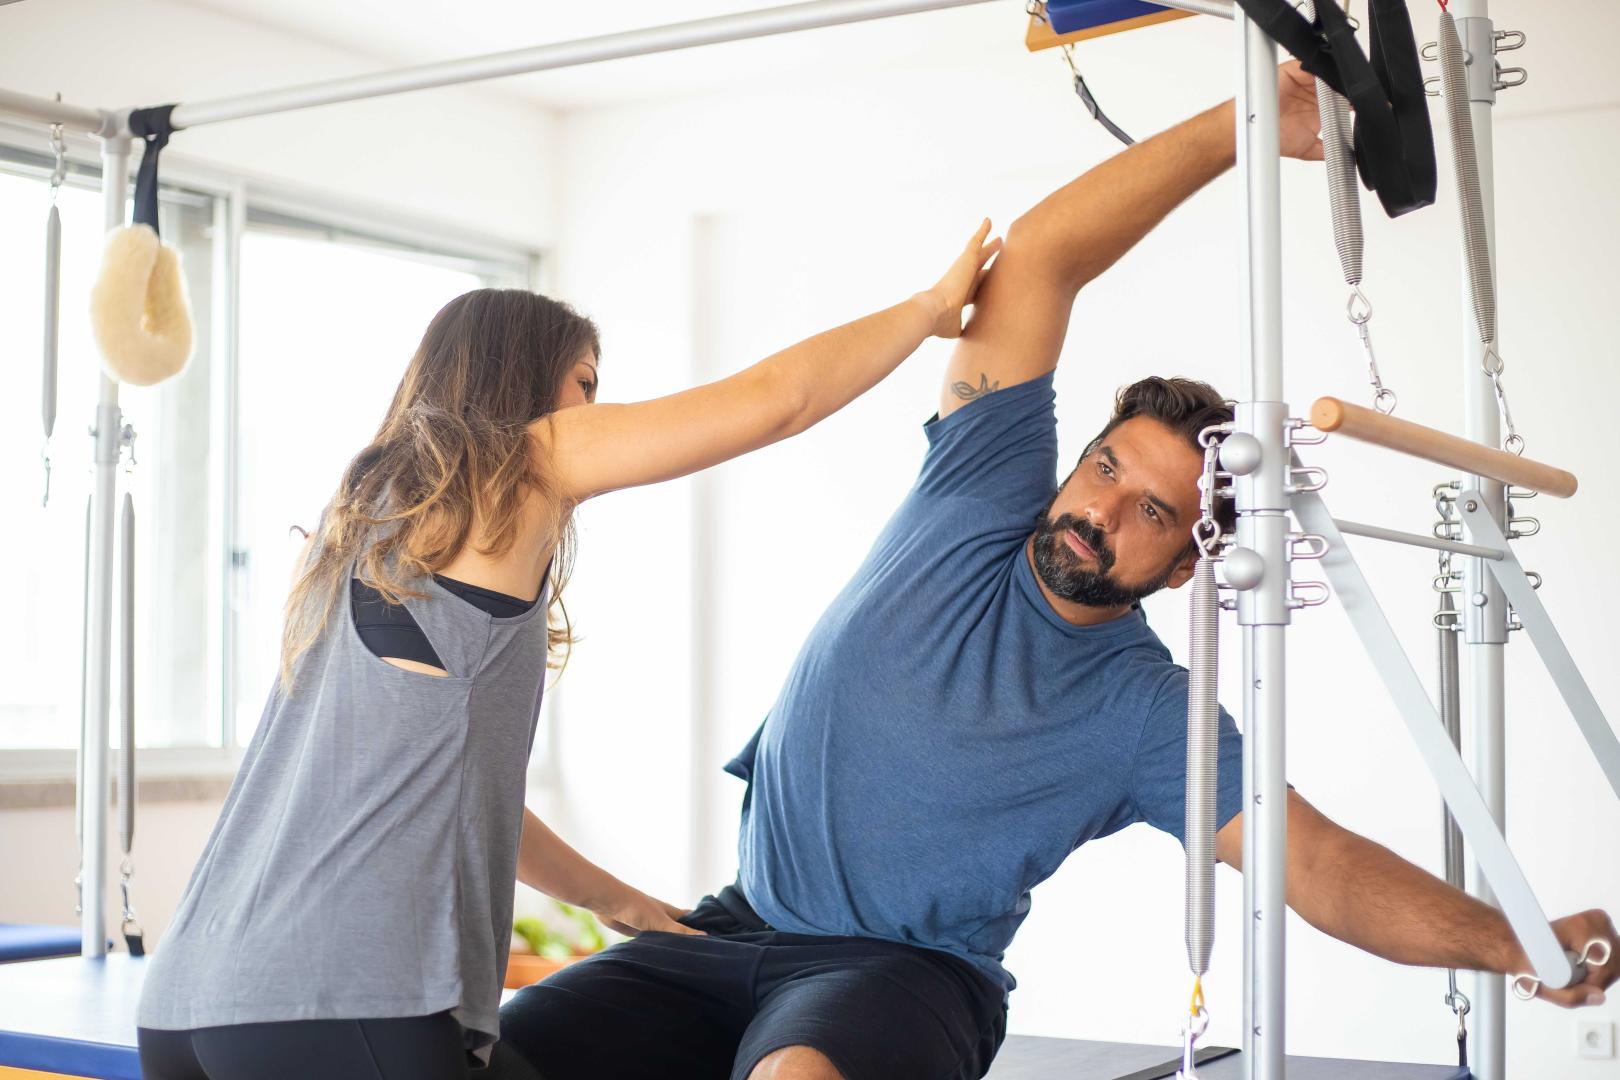 Northern California Based Physical Therapy Business - SC2128